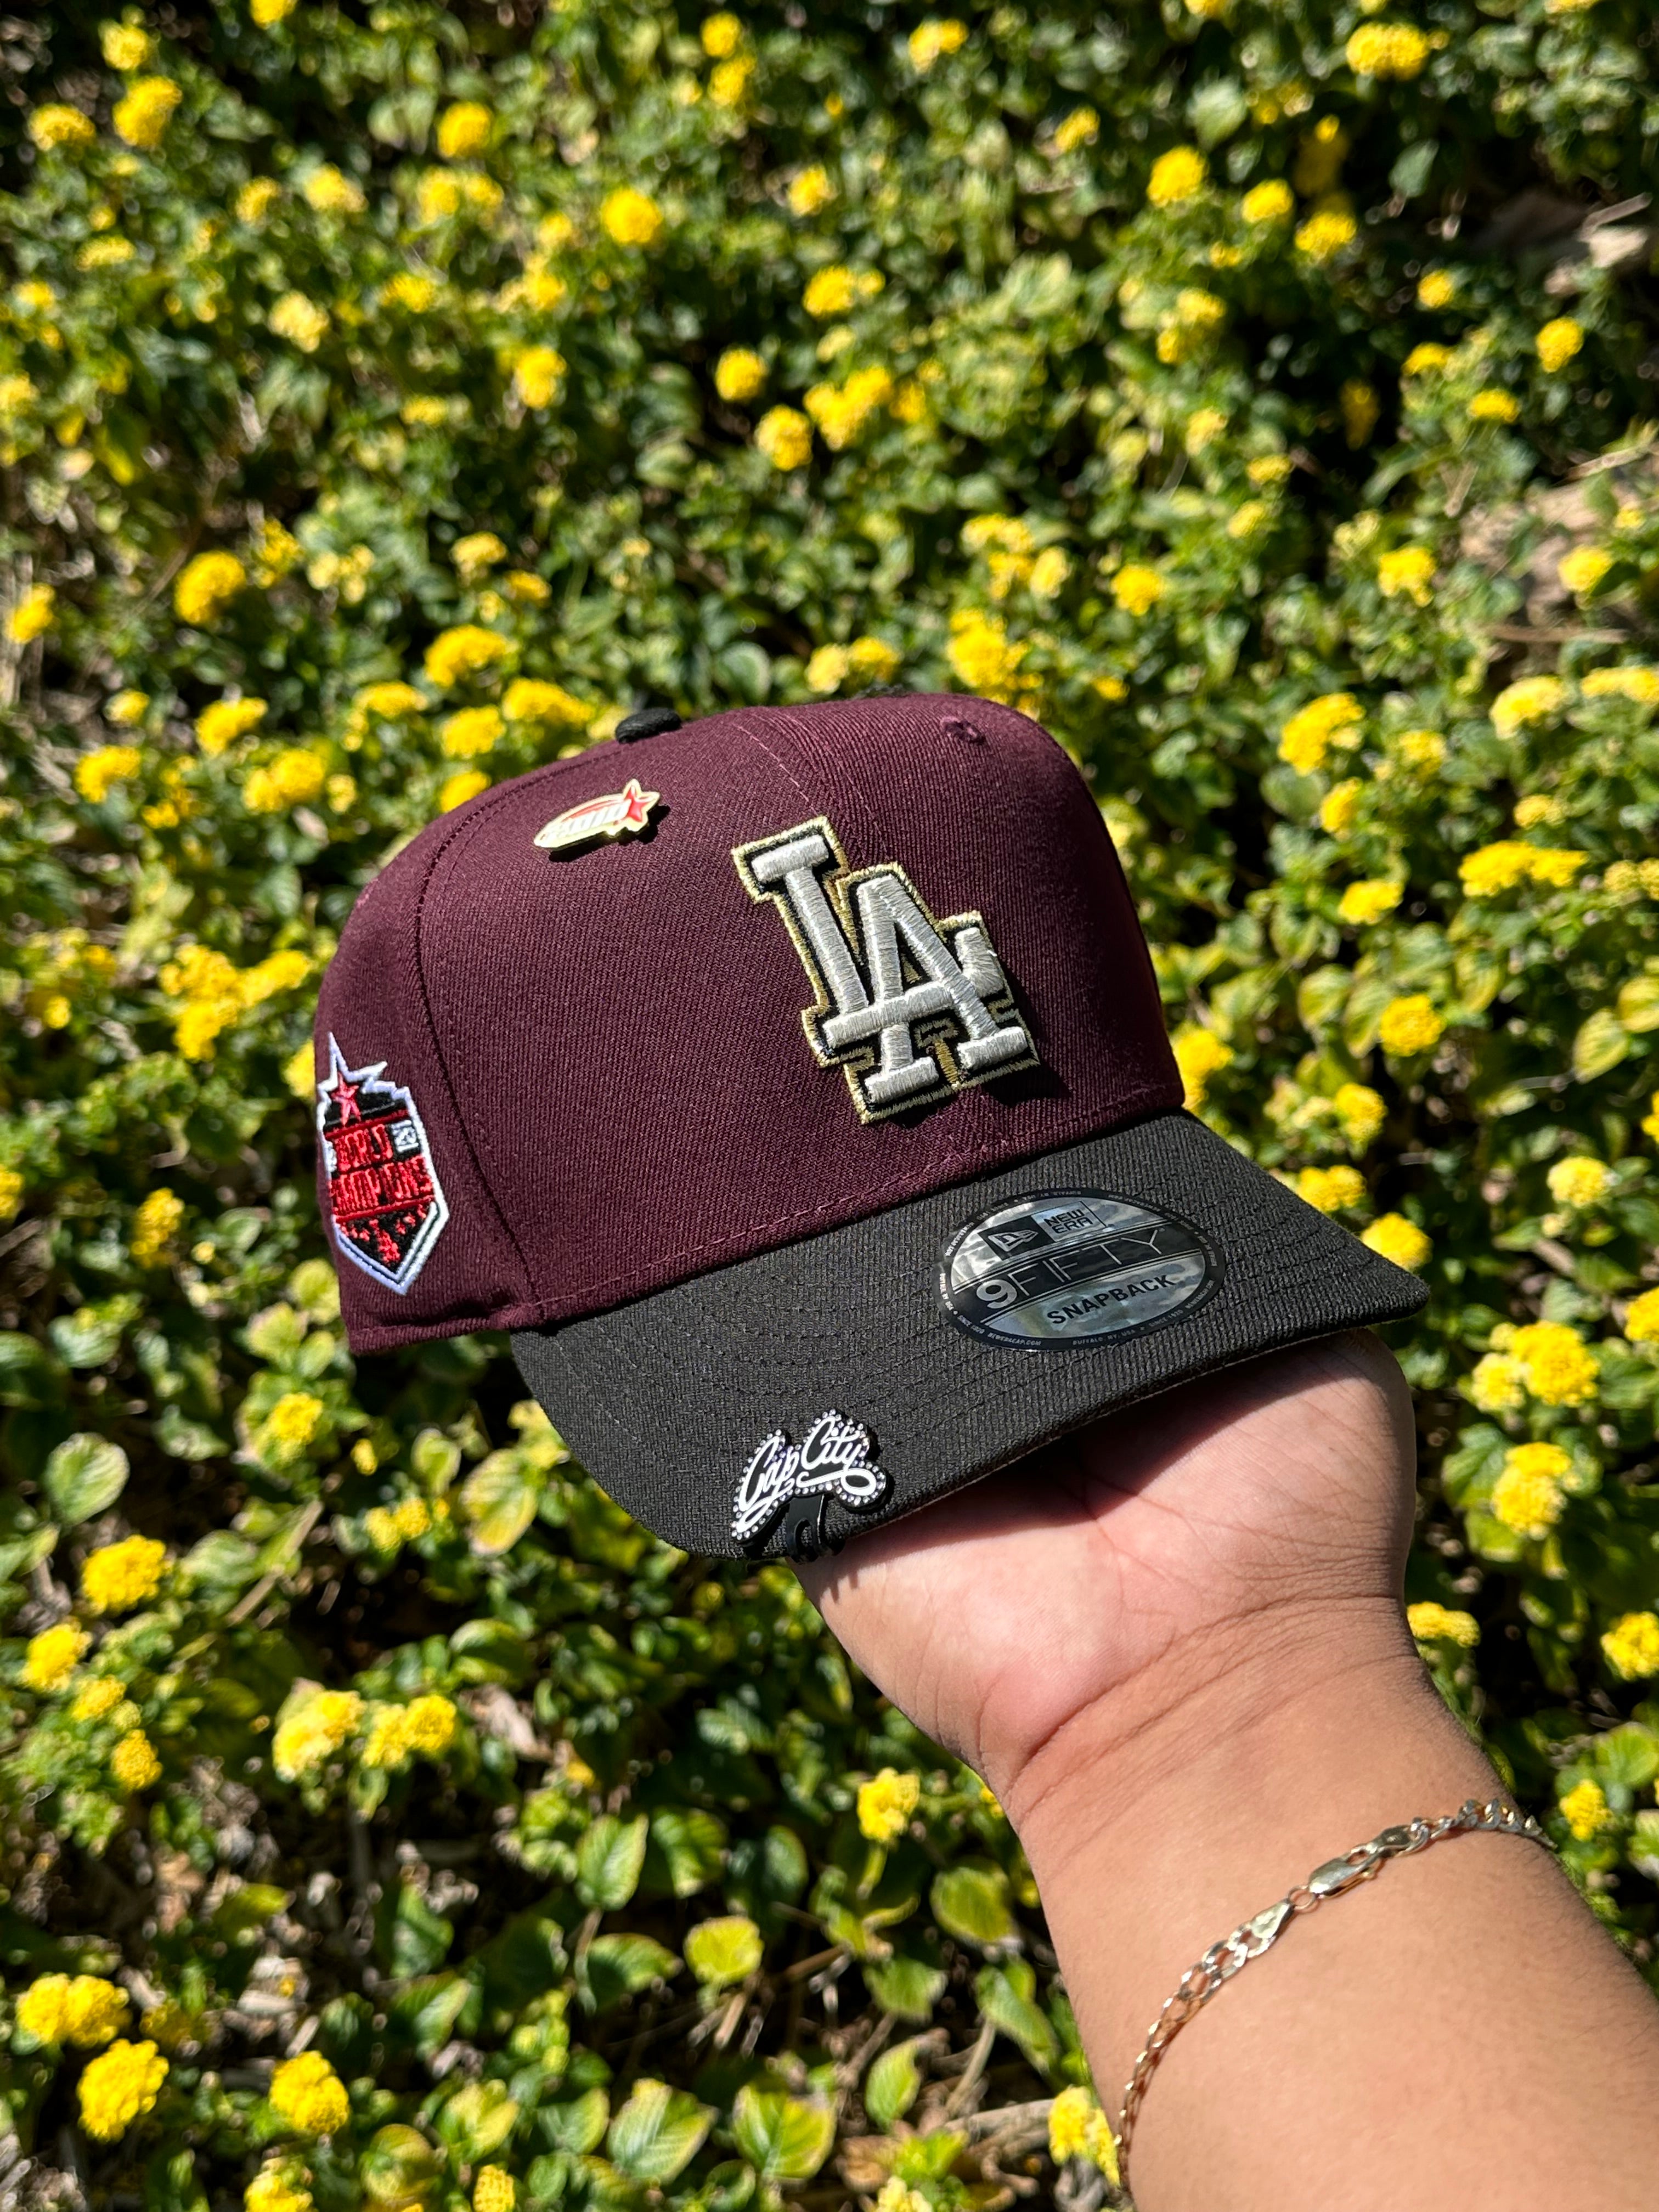 NEW ERA EXCLUSIVE 9FIFTY MAROON/BLACK LOS ANGELES DODGERS SNAPBACK W/ 2020 "WORLD CHAMPIONS" PATCH